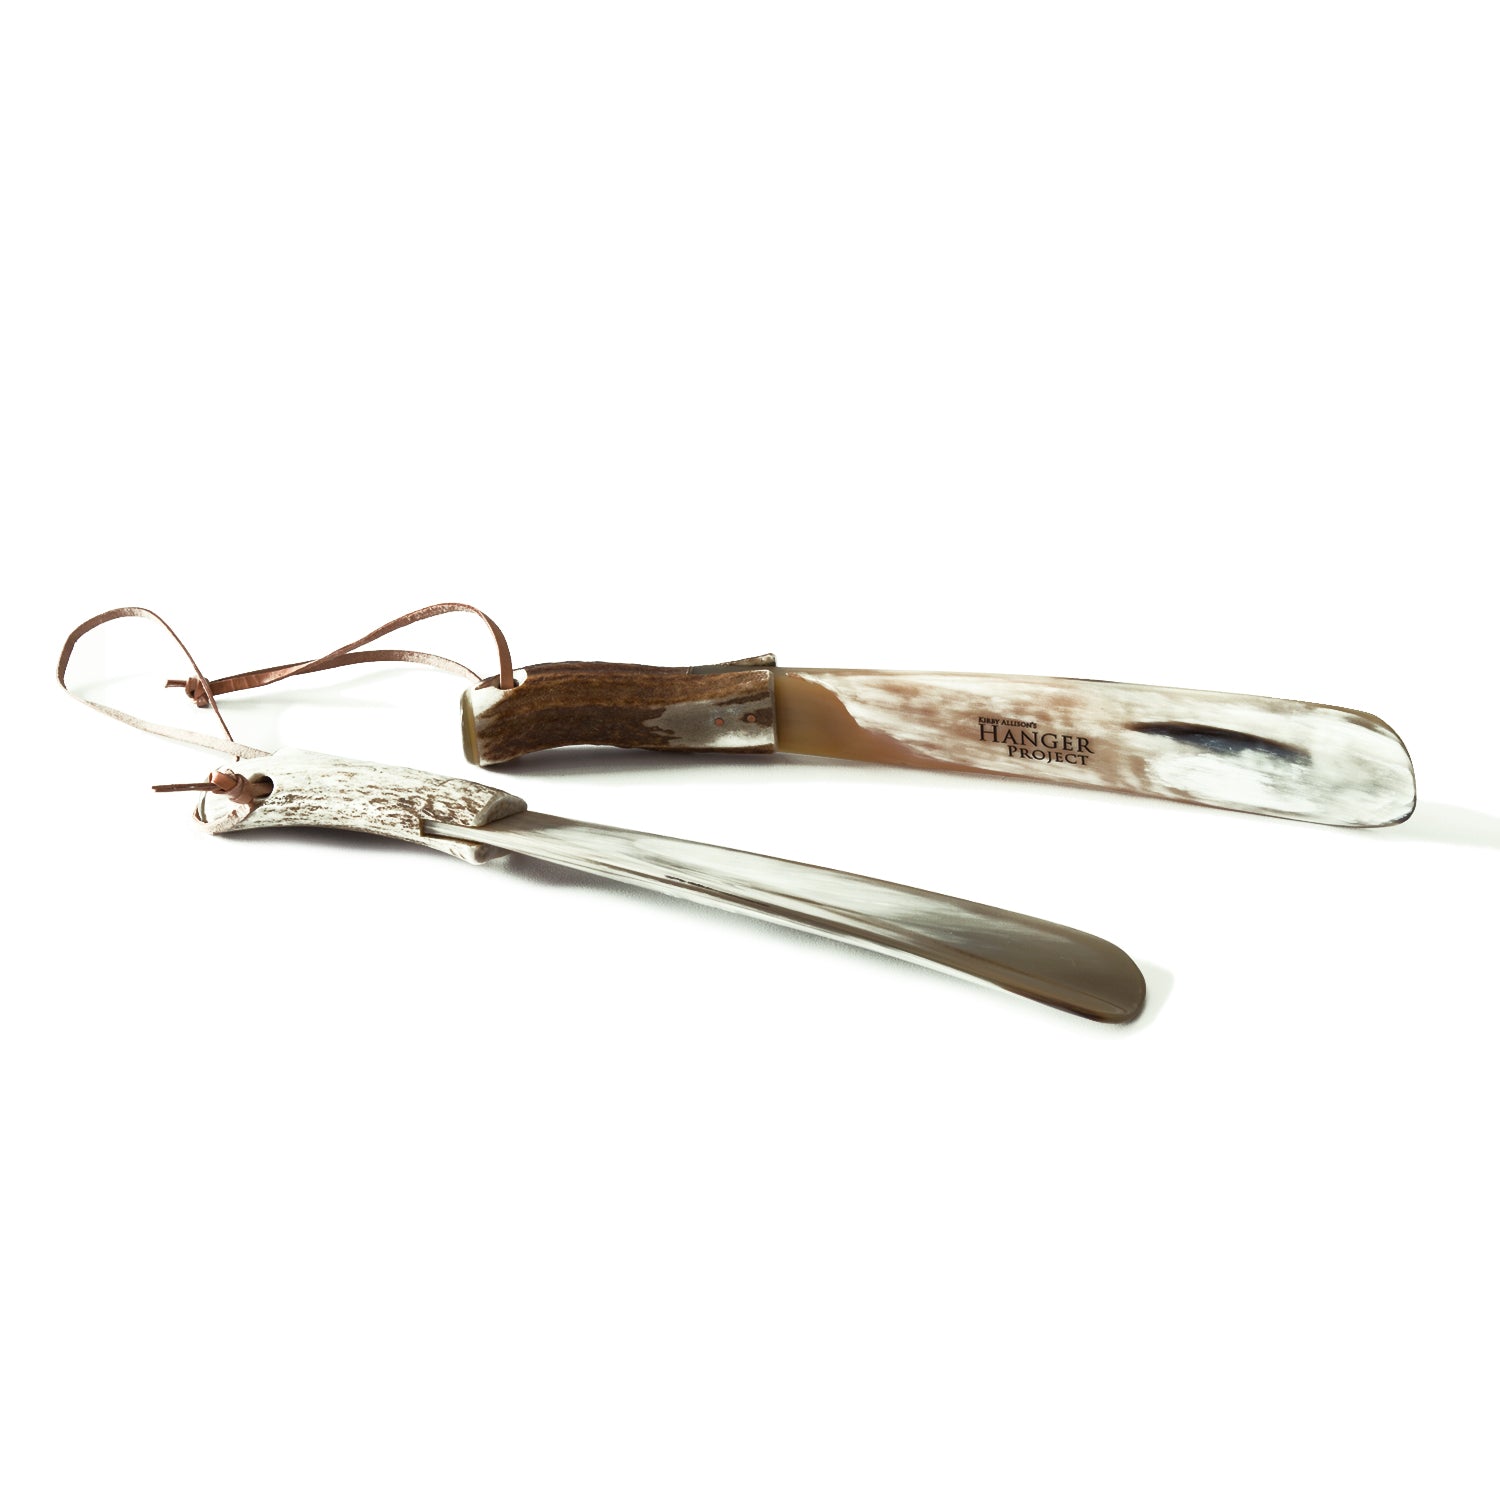 AbbeyHorn 7-inch Stag-Handle Shoehorn